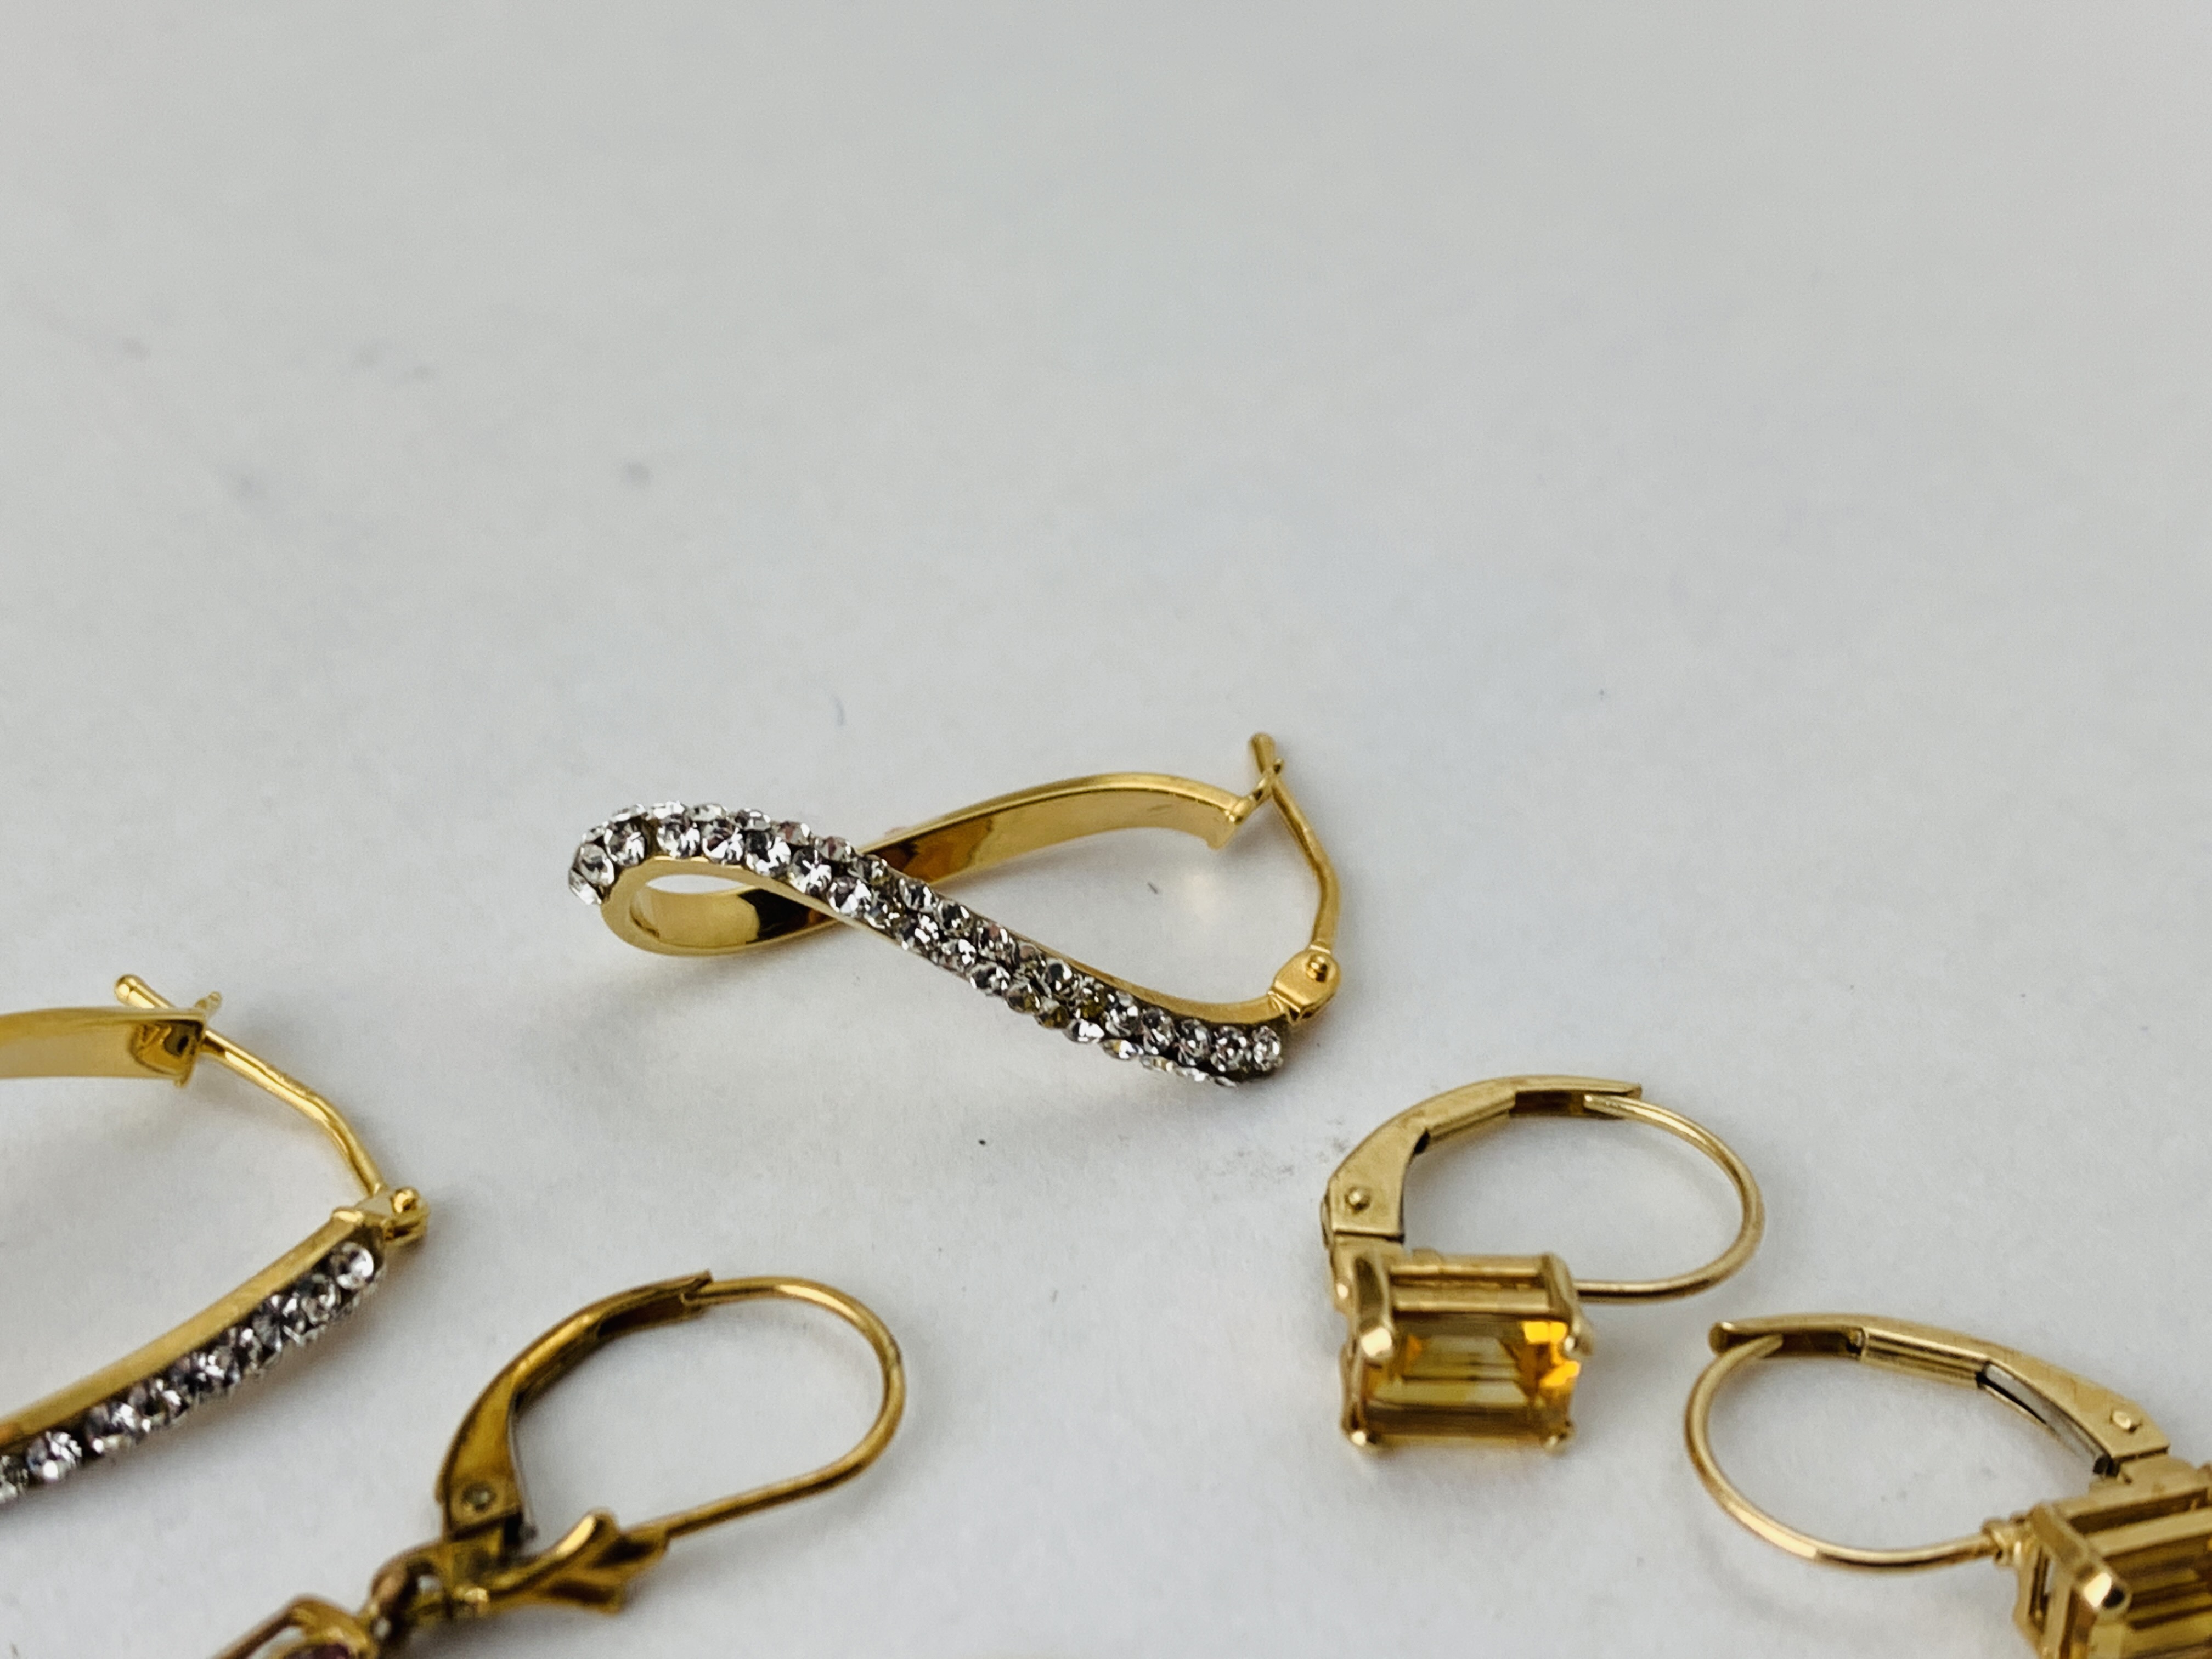 4 X PAIRS OF 9CT GOLD STONE SET DESIGNER EARRINGS - Image 6 of 7